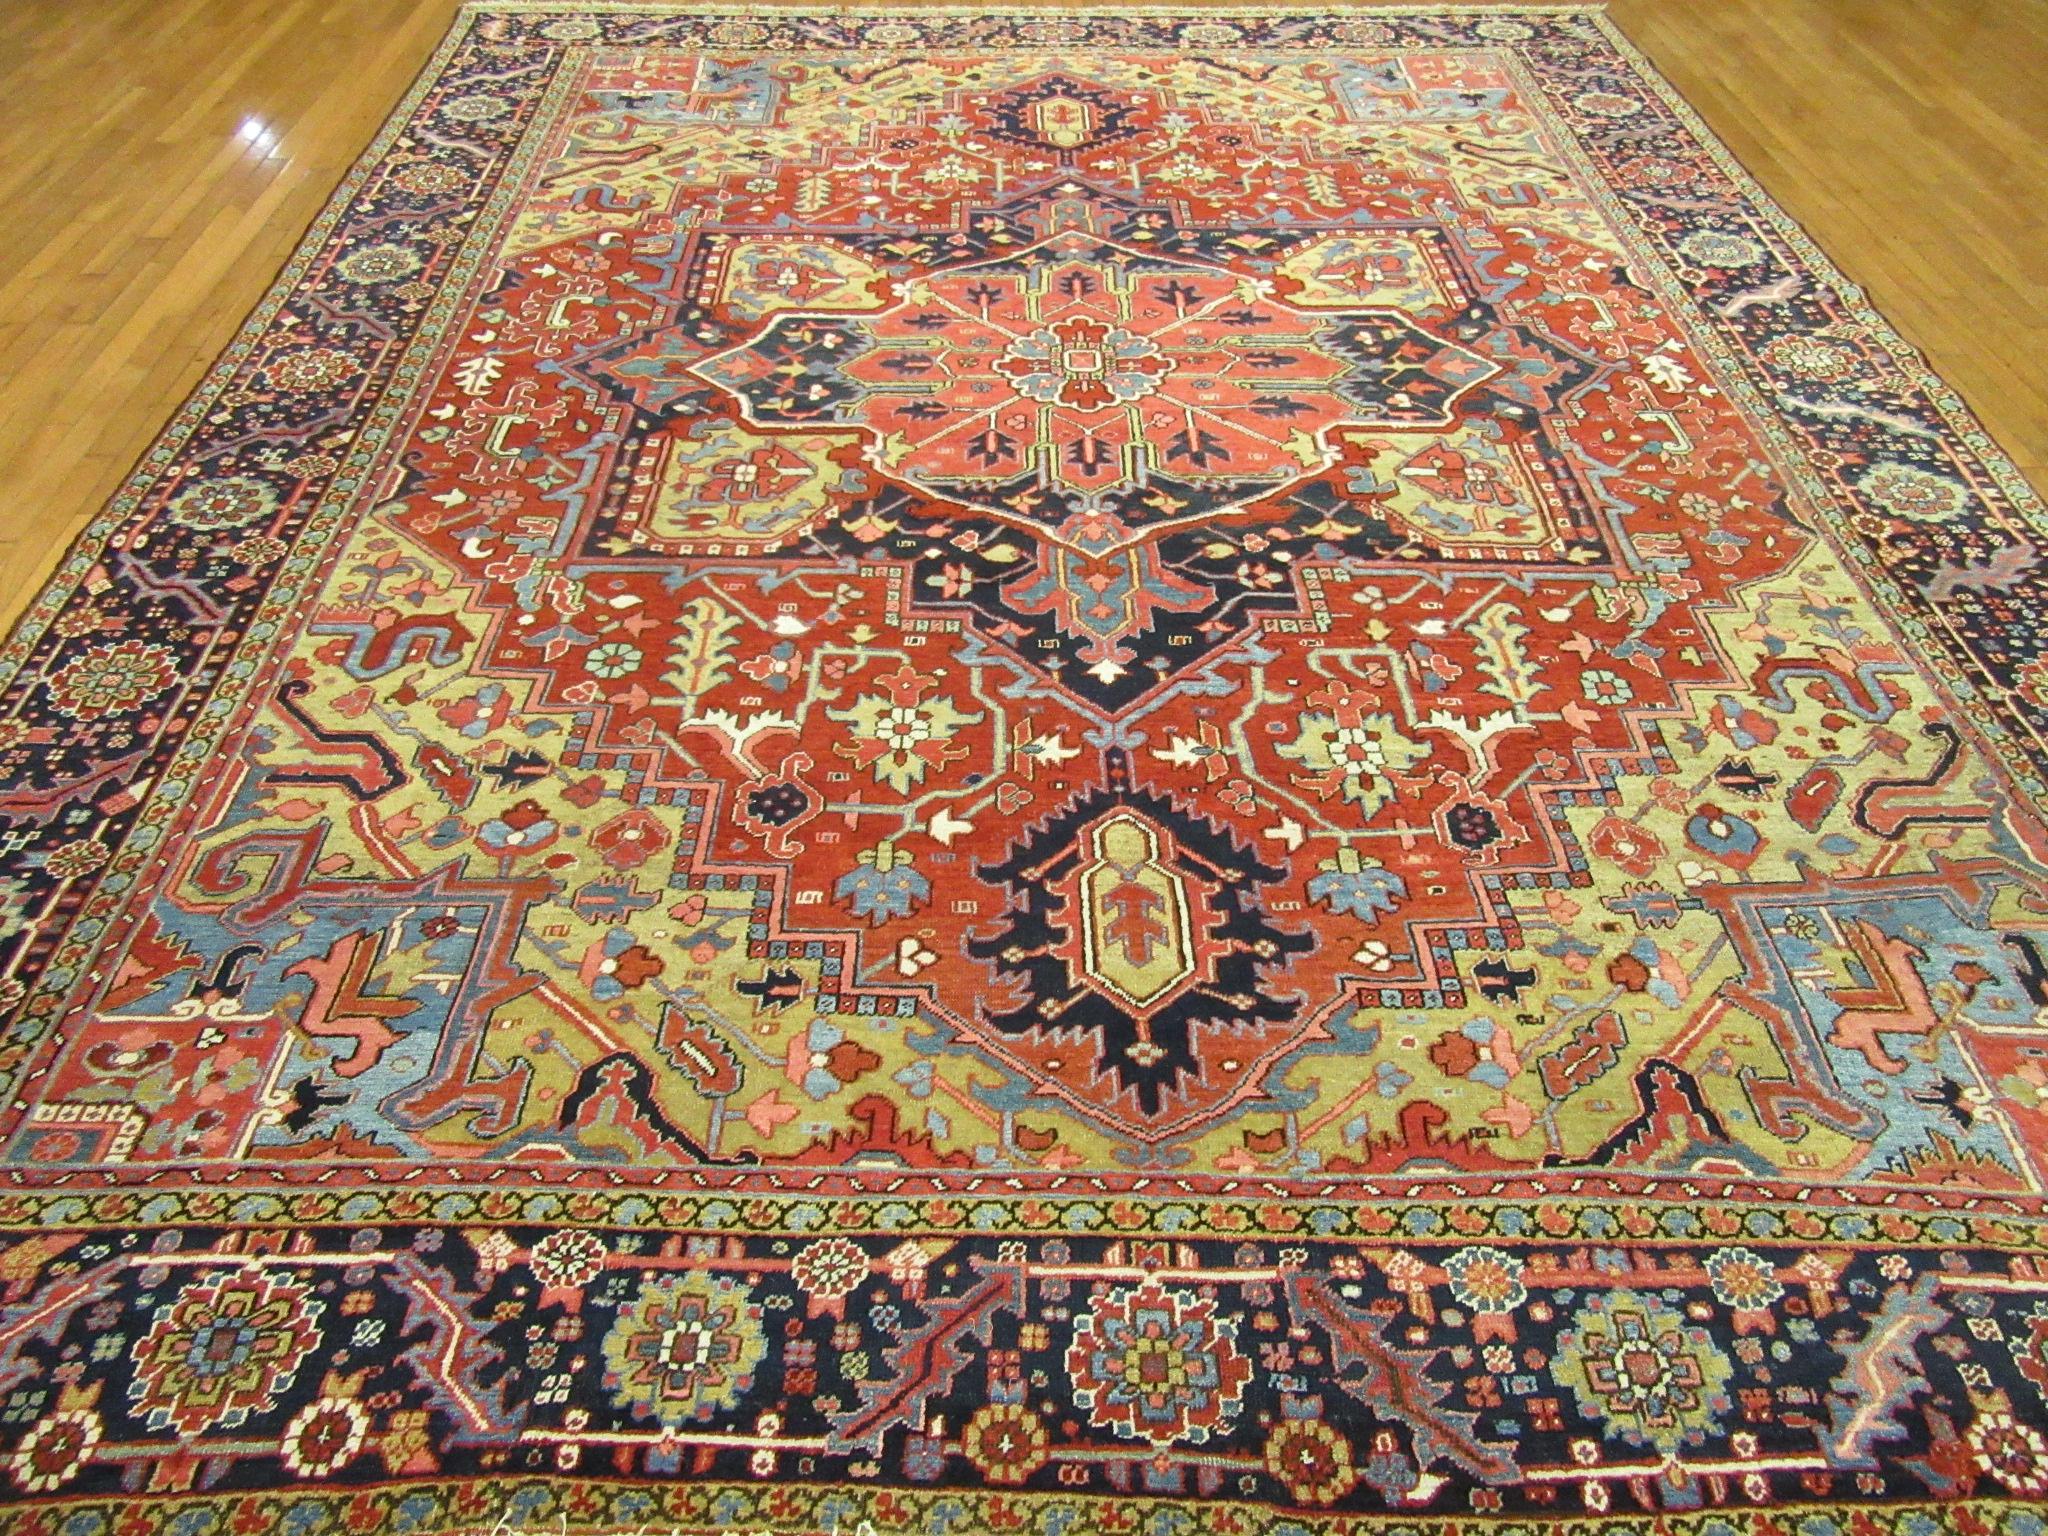 This is antique hand knotted Persian rug from the infamous village of Heriz in northwest Iran. It is made with wool colored with all natural dyes on a cotton foundation in the classic central and corner medallion Heriz design proven to be one of the